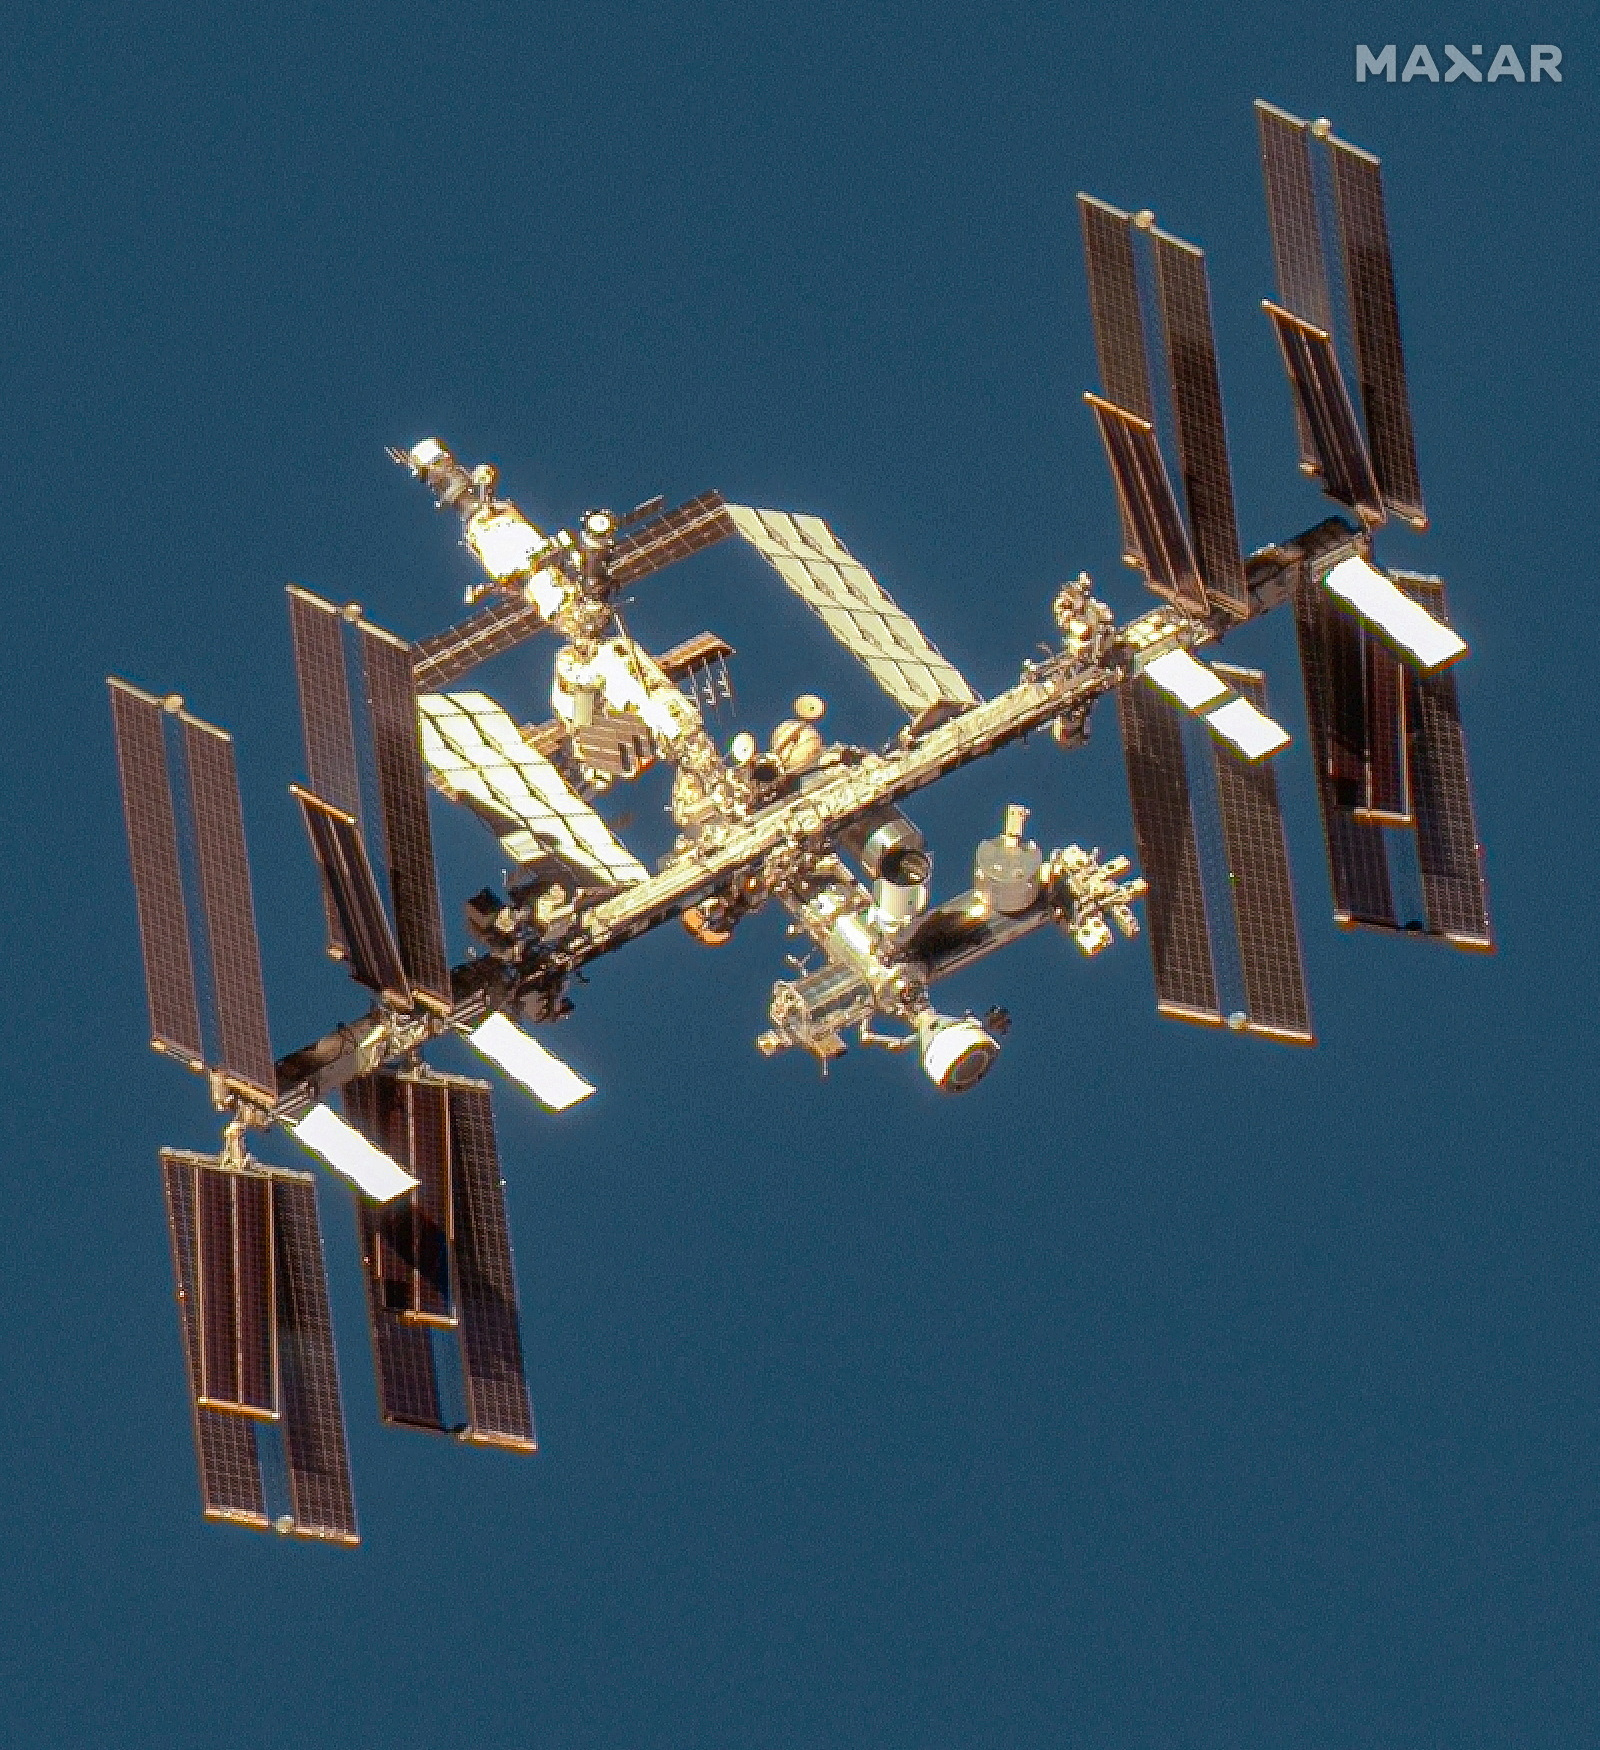 A satellite image shows an overview of the International Space Station with the Boeing Starliner spacecraft